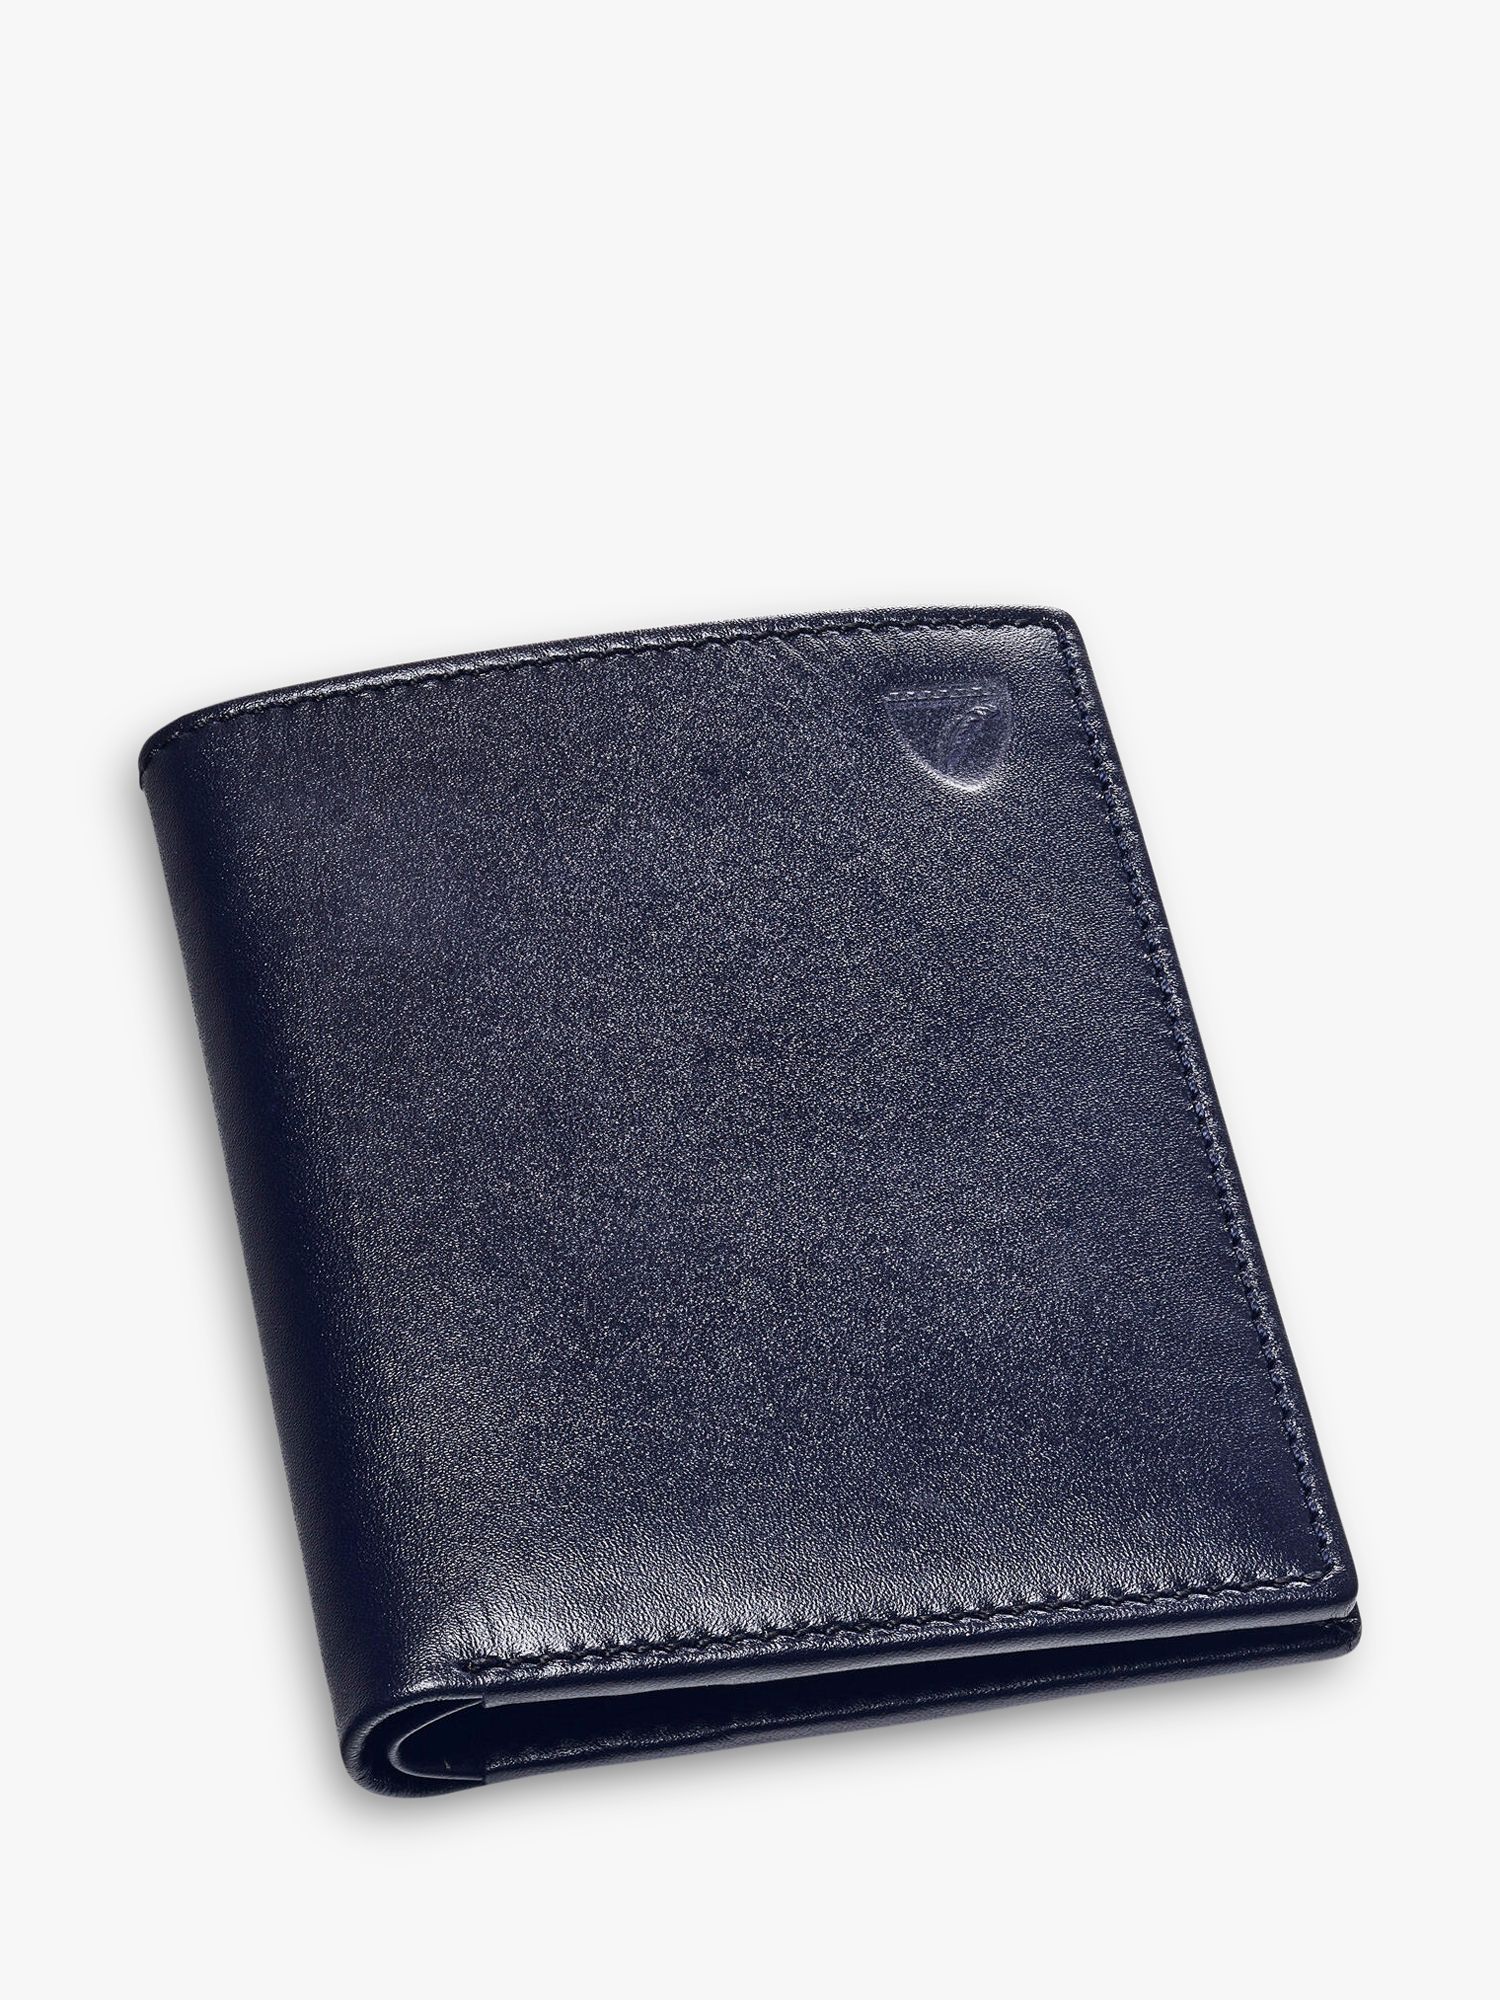 Aspinal of London Smooth Leather Double Credit Card Wallet, Navy